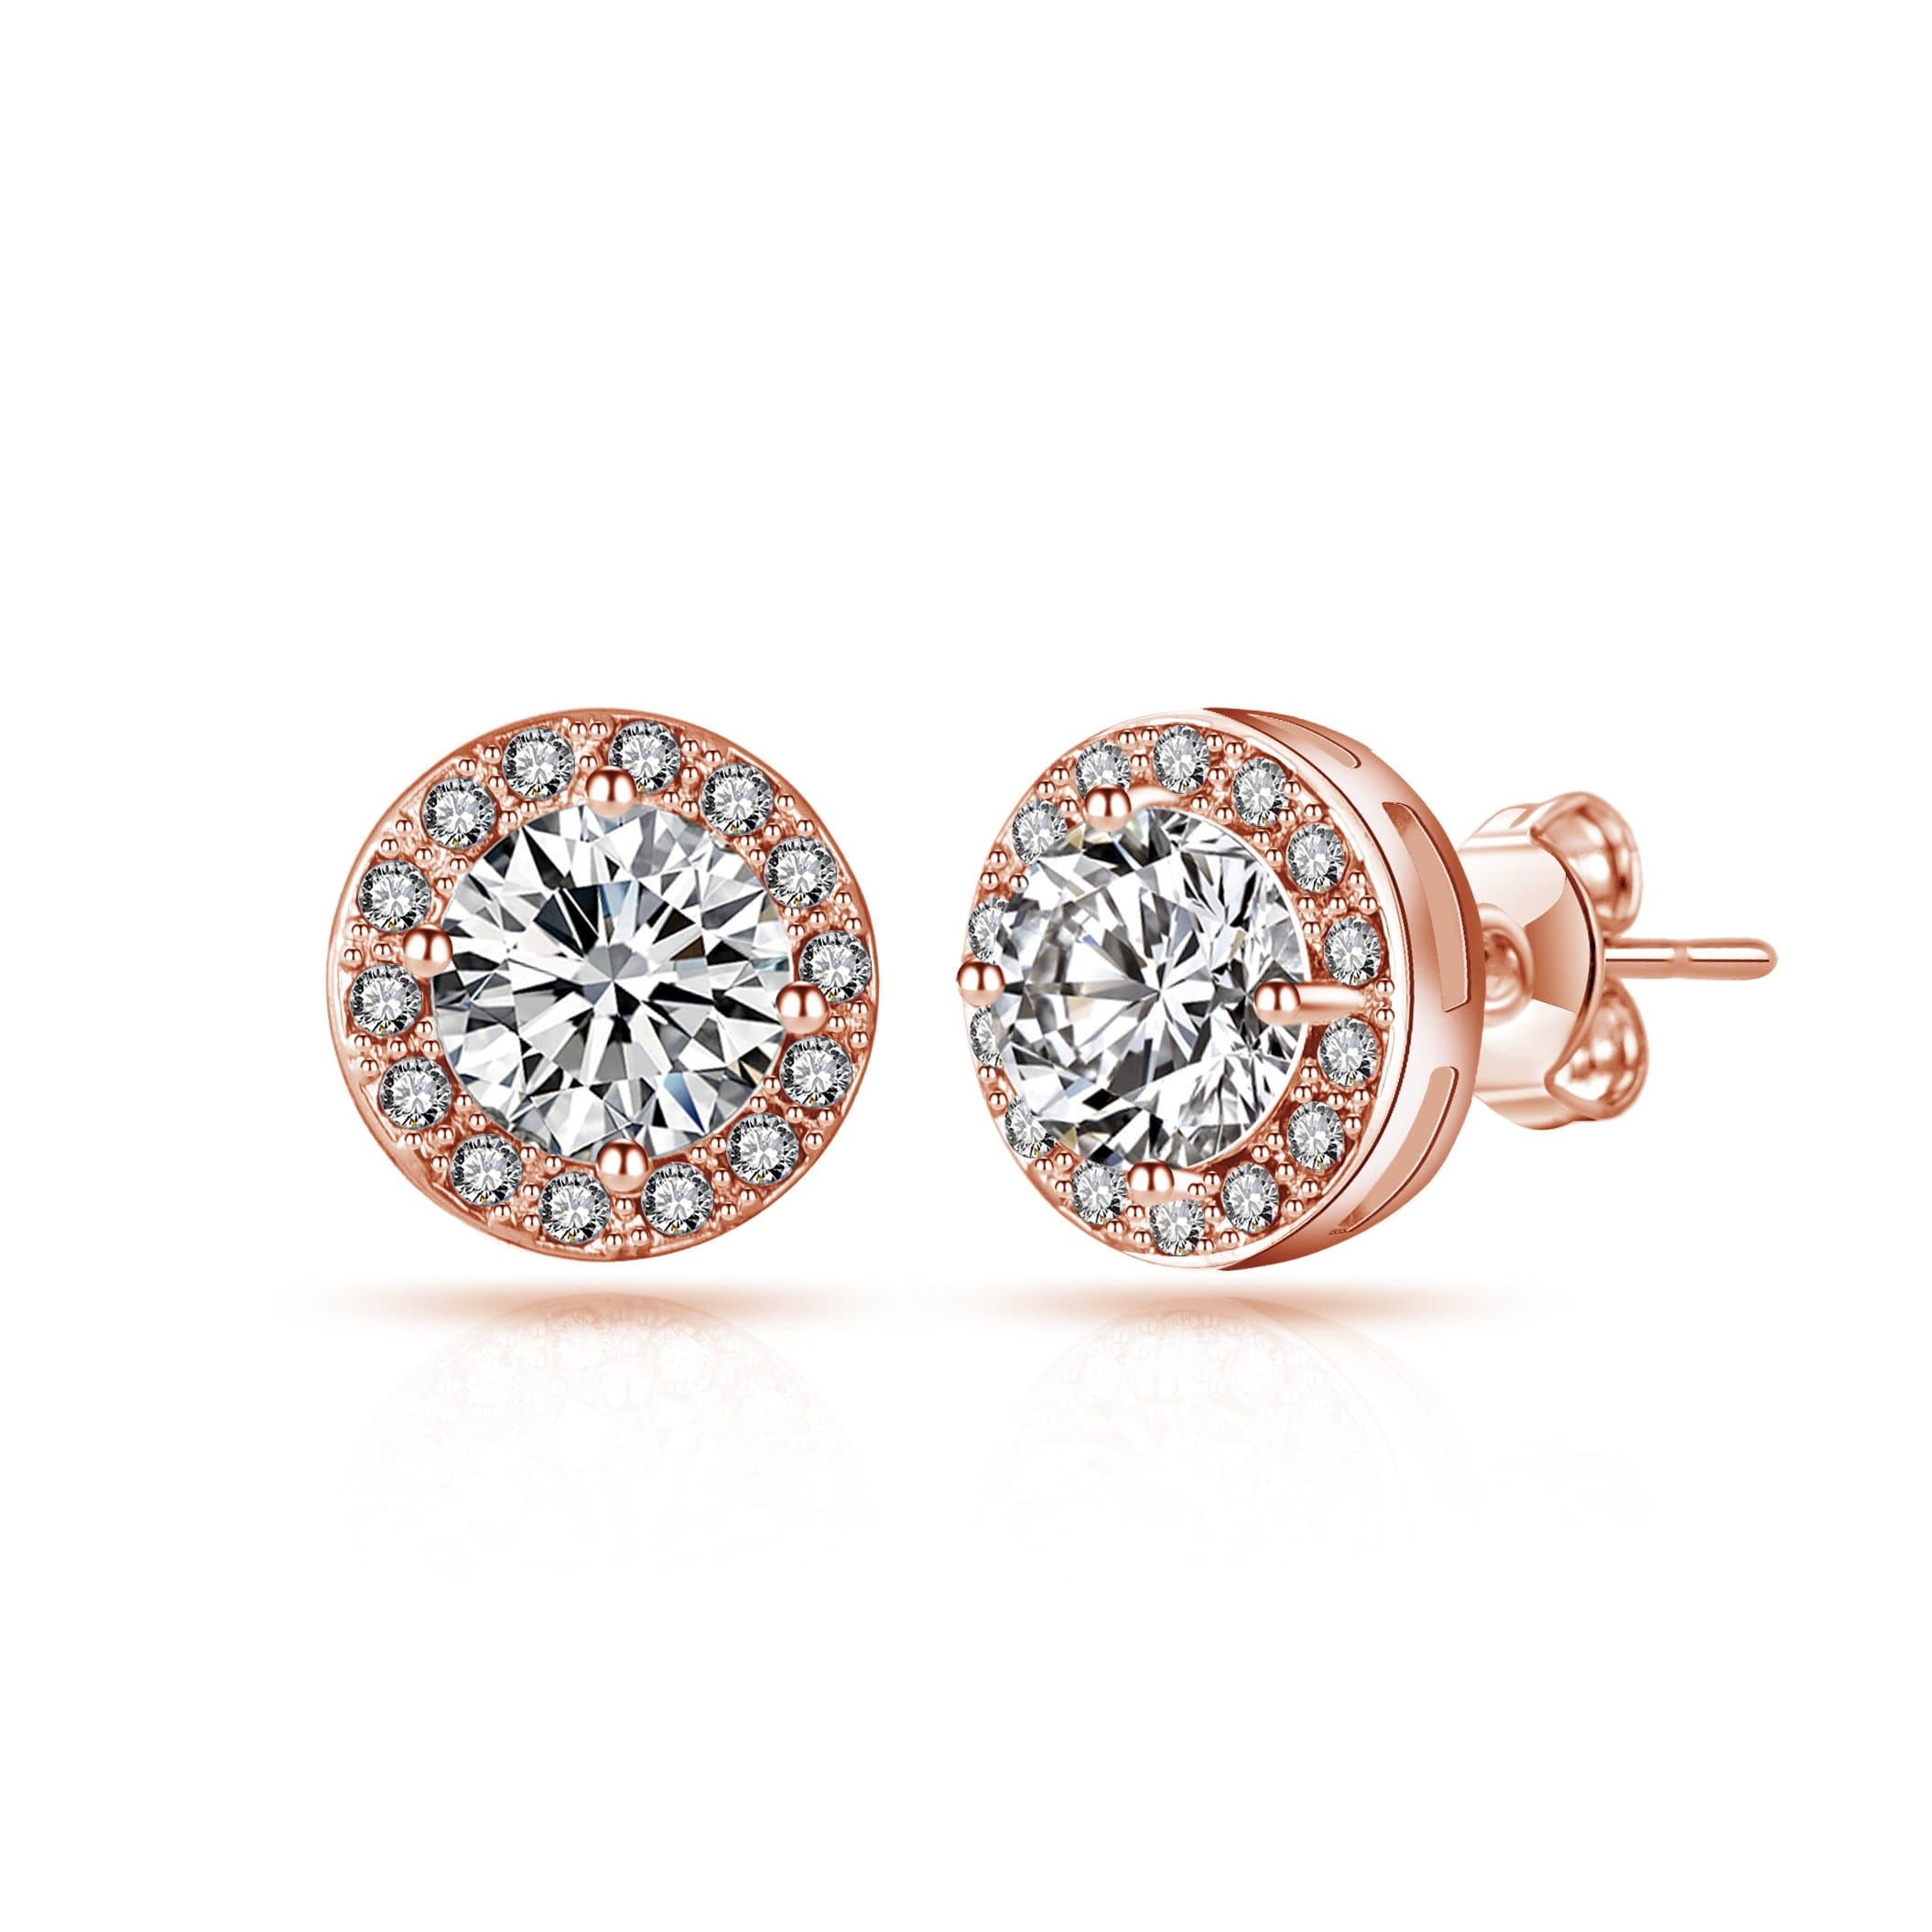 Rose Gold Plated Halo Earrings Created with Zircondia® Crystals by Philip Jones Jewellery